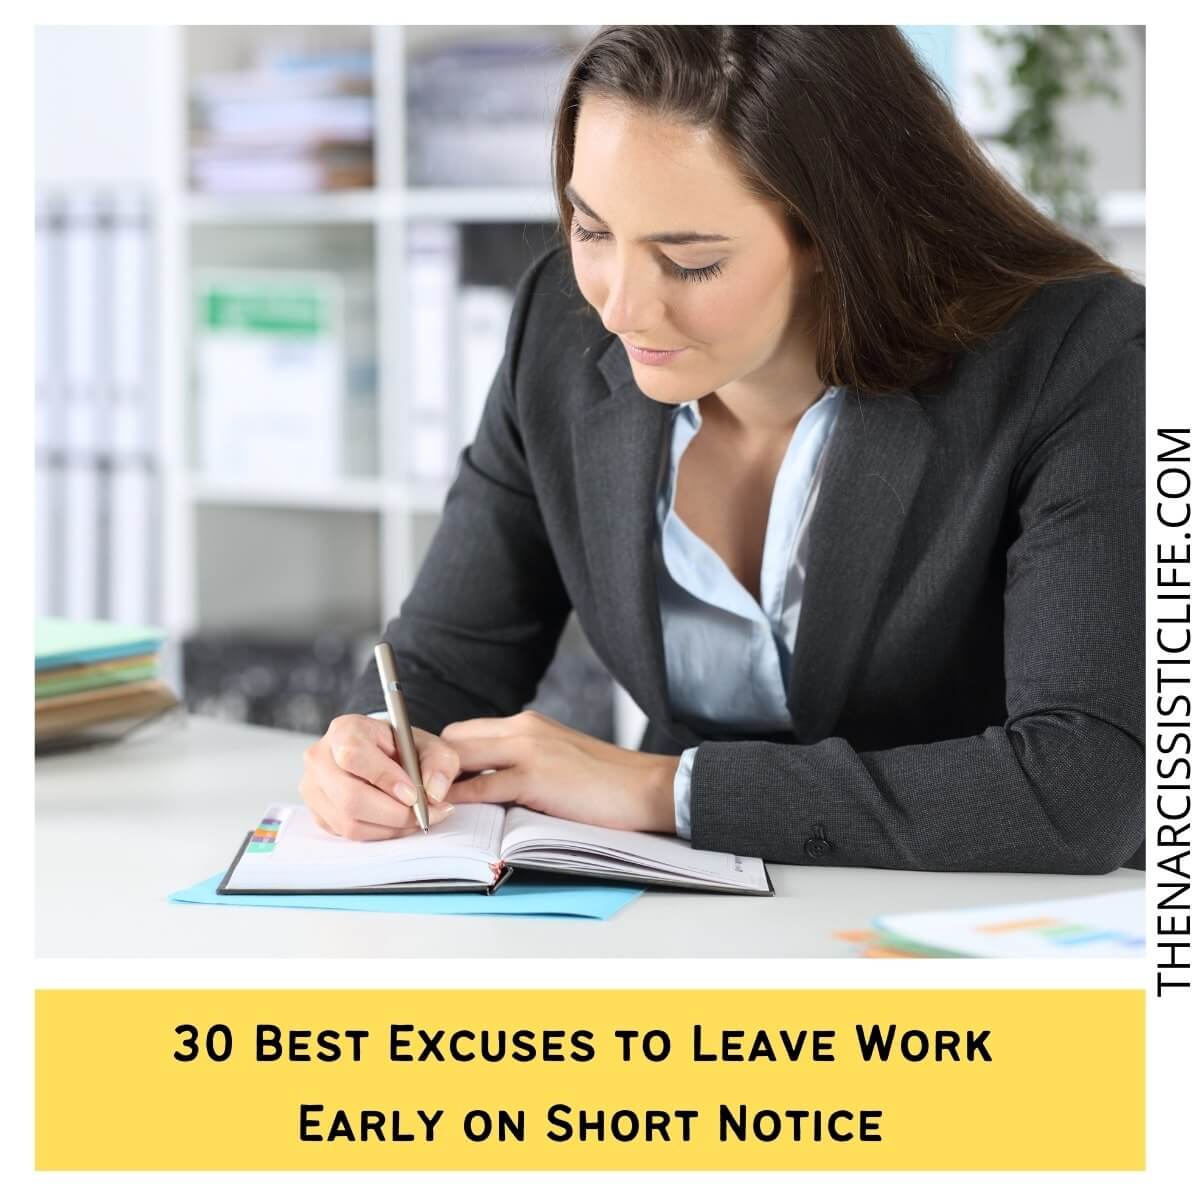 Excuses to leave work early for an interview